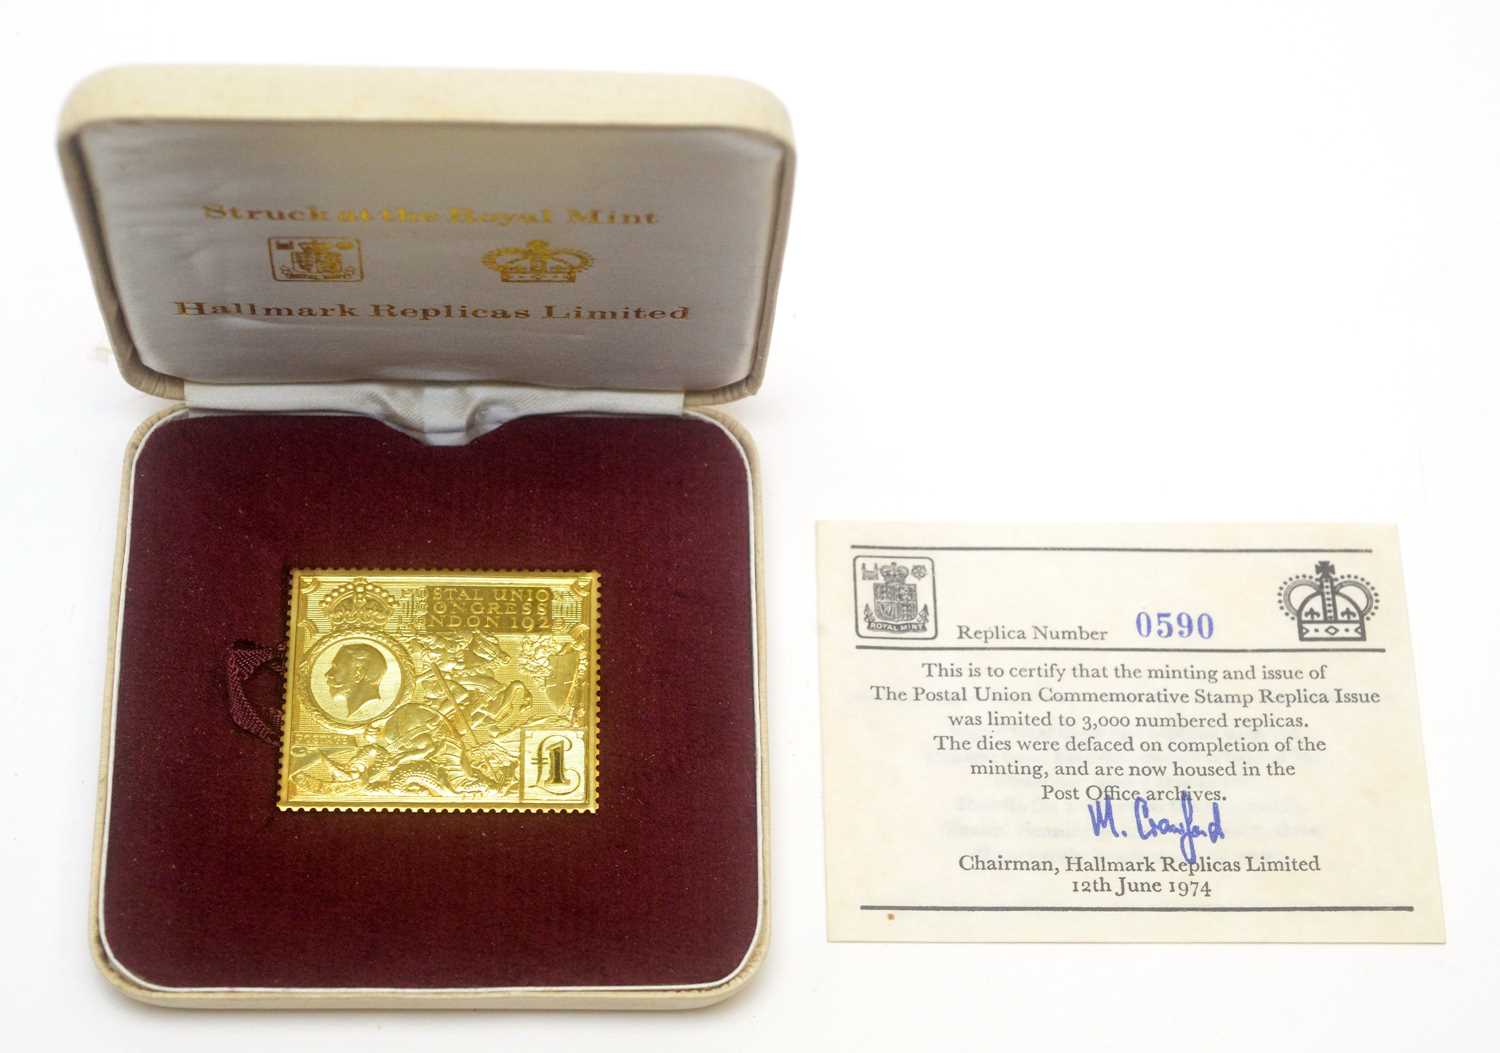 953 - Royal Mint for Hallmarks Replica Limited Postal Union Congress replica £1 stamp,